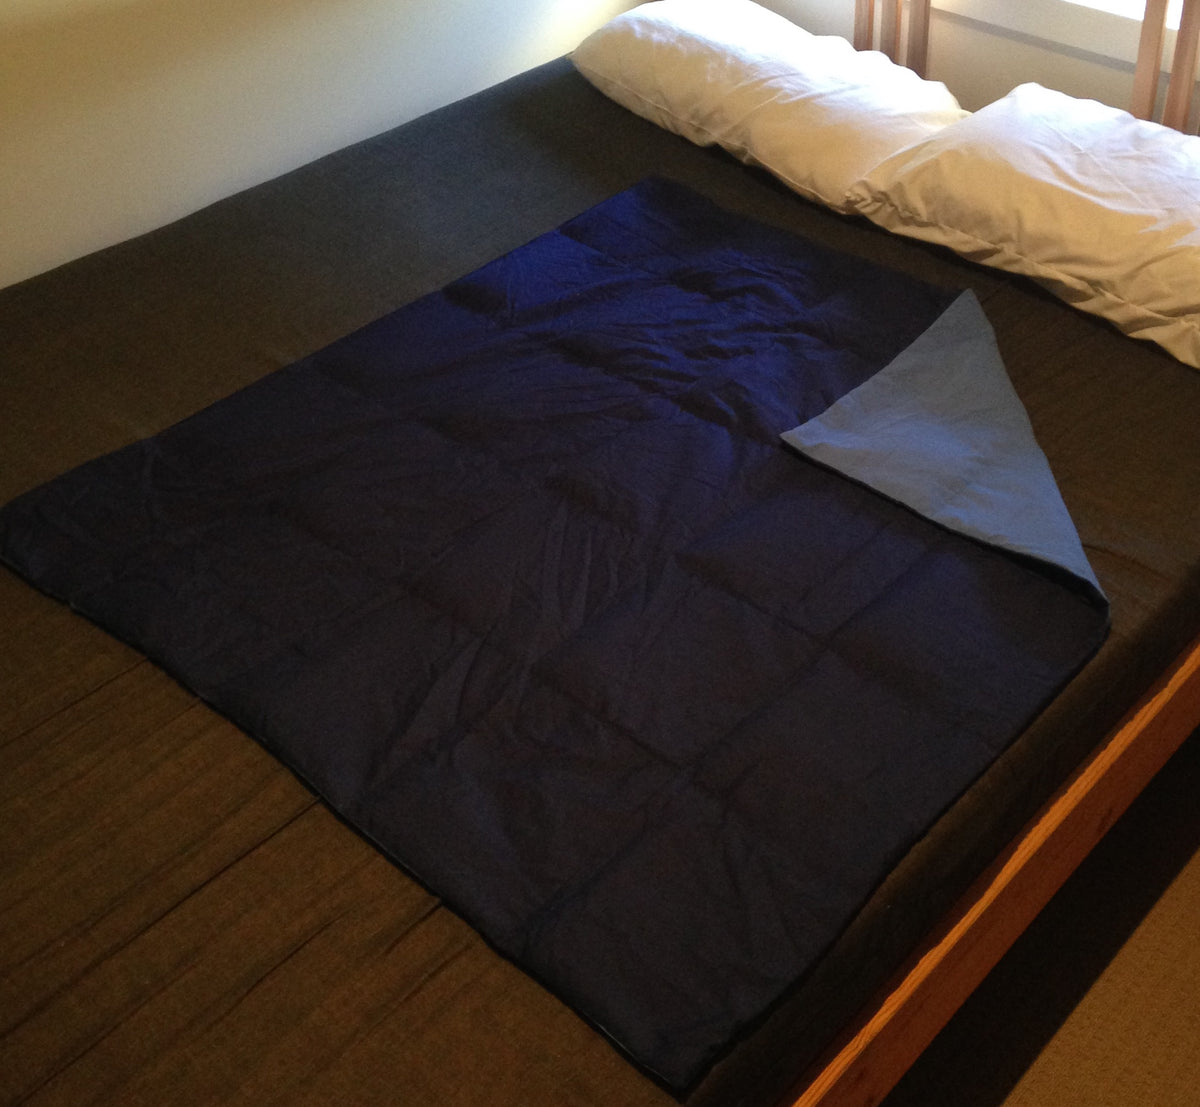 Weighted Blanket - Single bed size (blue on blue)